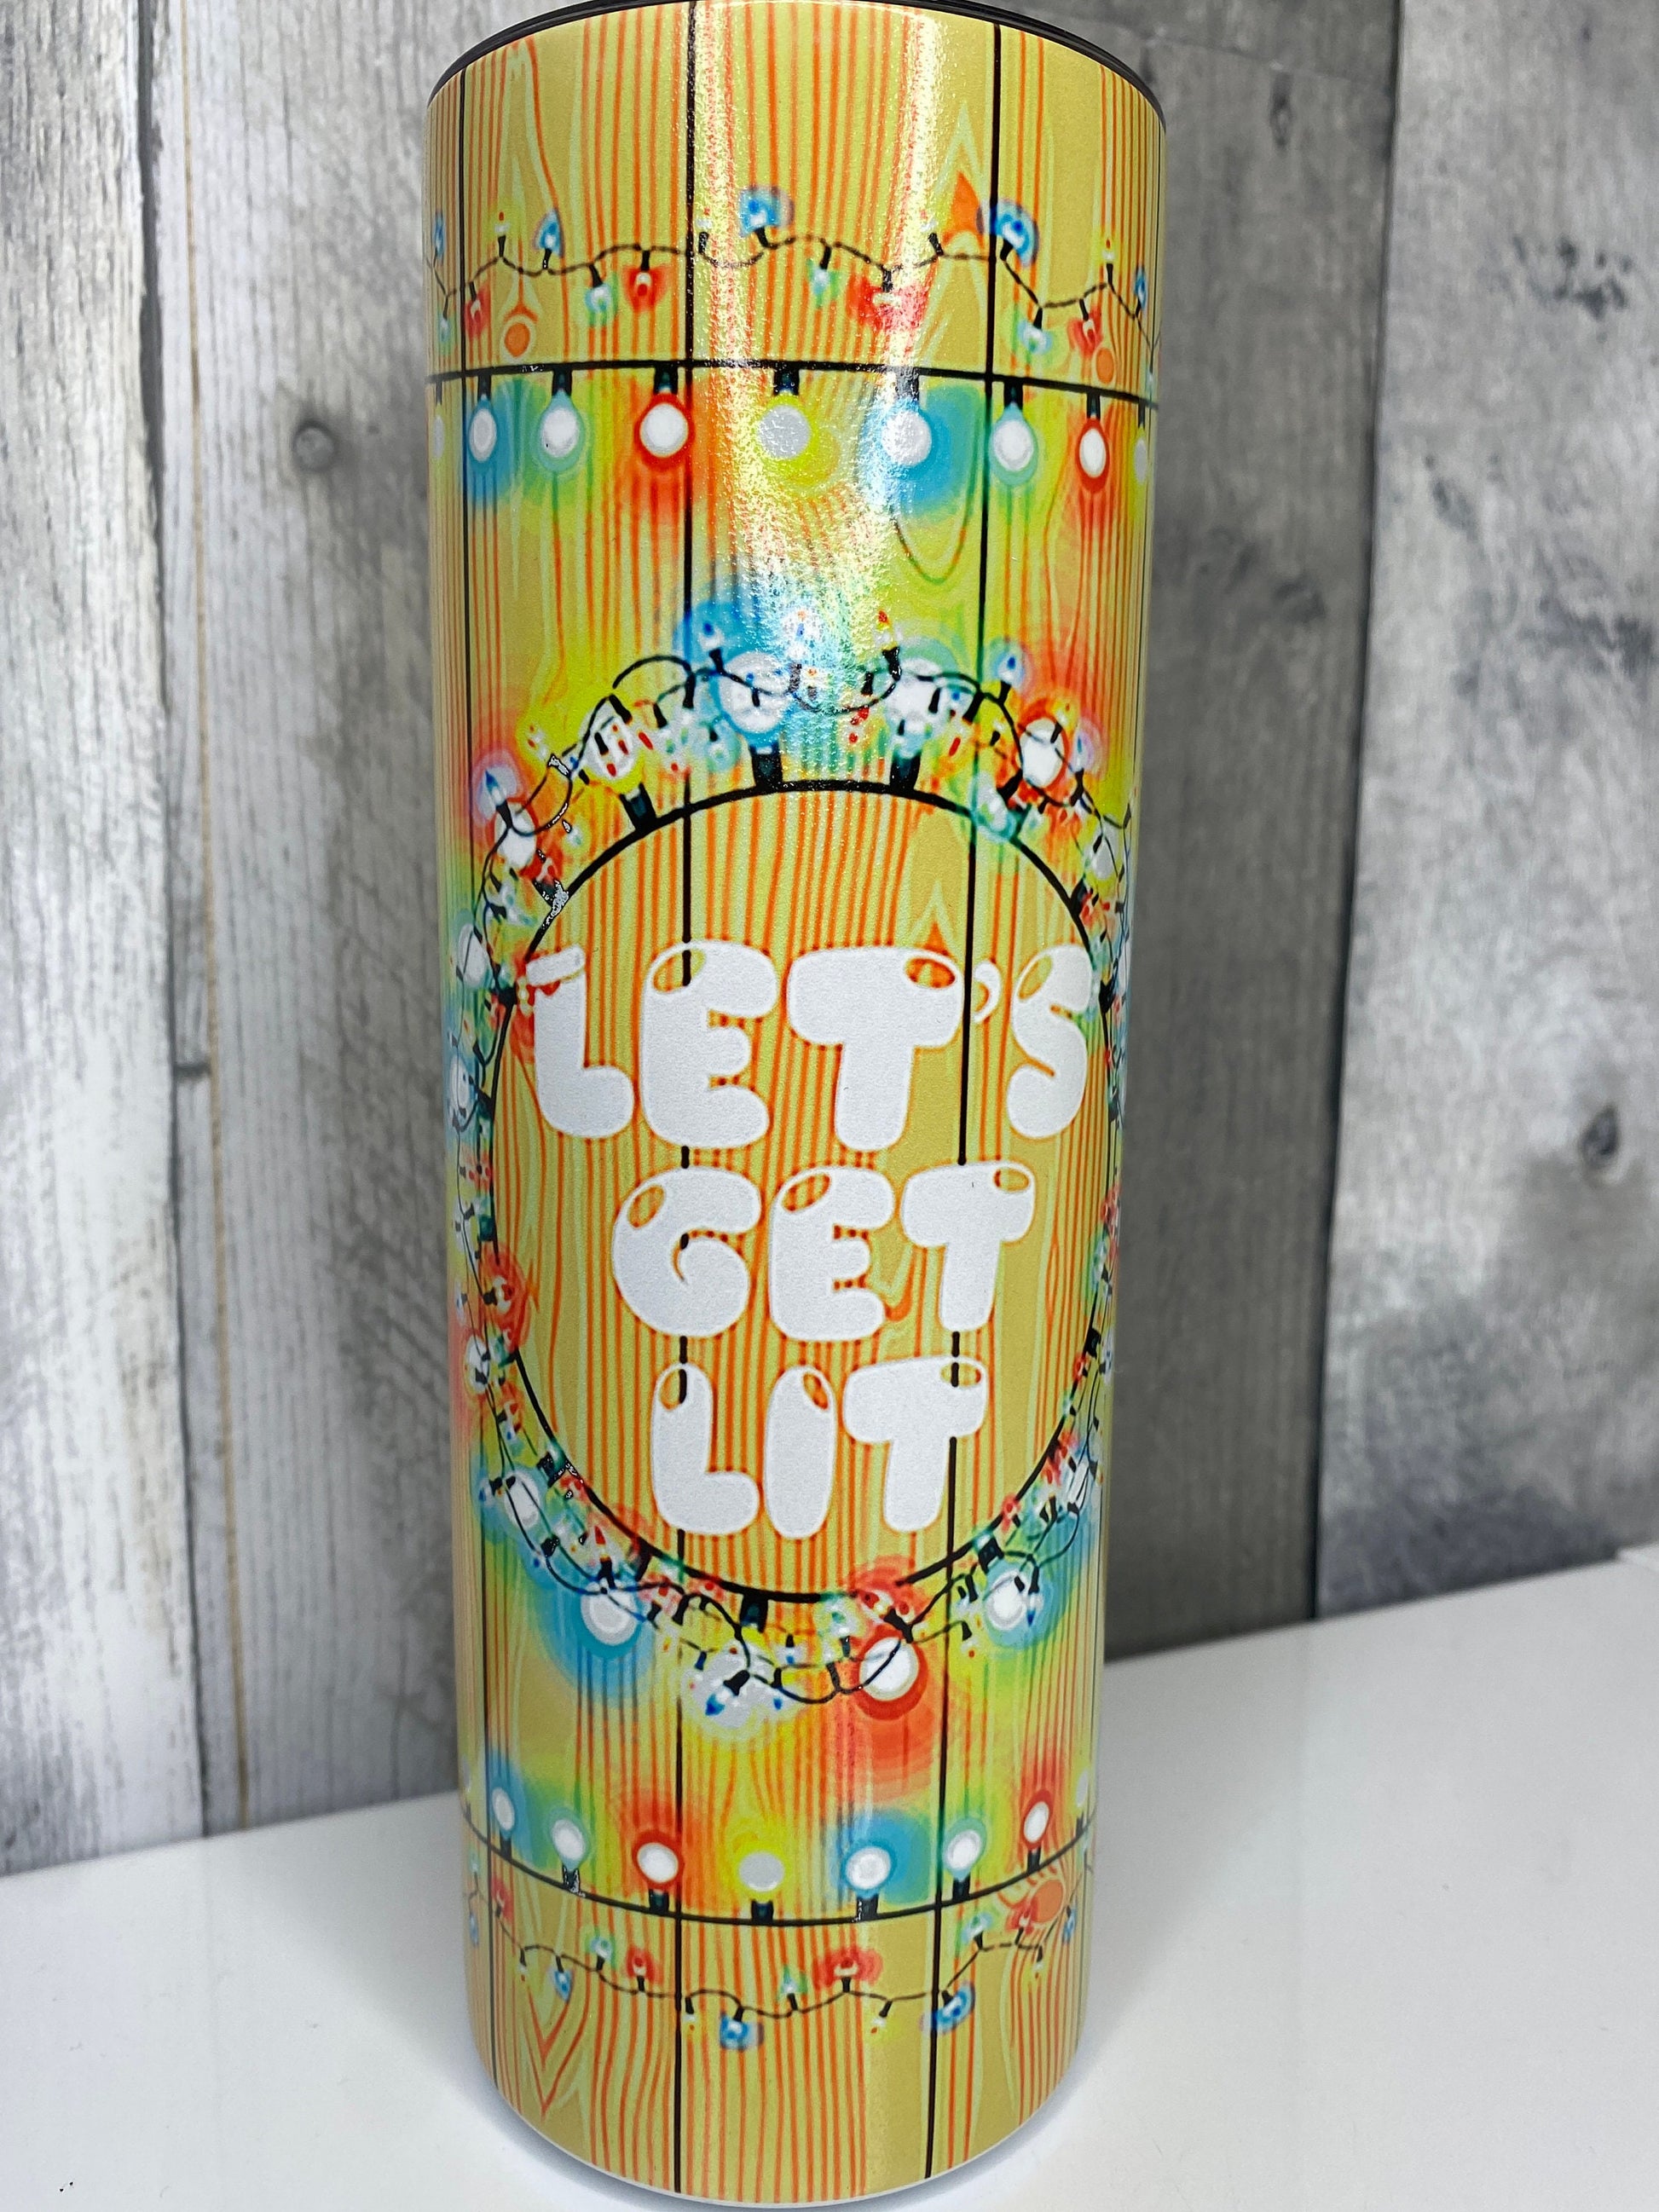 Let's Get Lit Christmas Tumbler Glow in the Dark Tumbler, Funny Gift Idea, Christmas Gifts, Insulated Cup, Travel Cup - Binnie & Bopper Designs